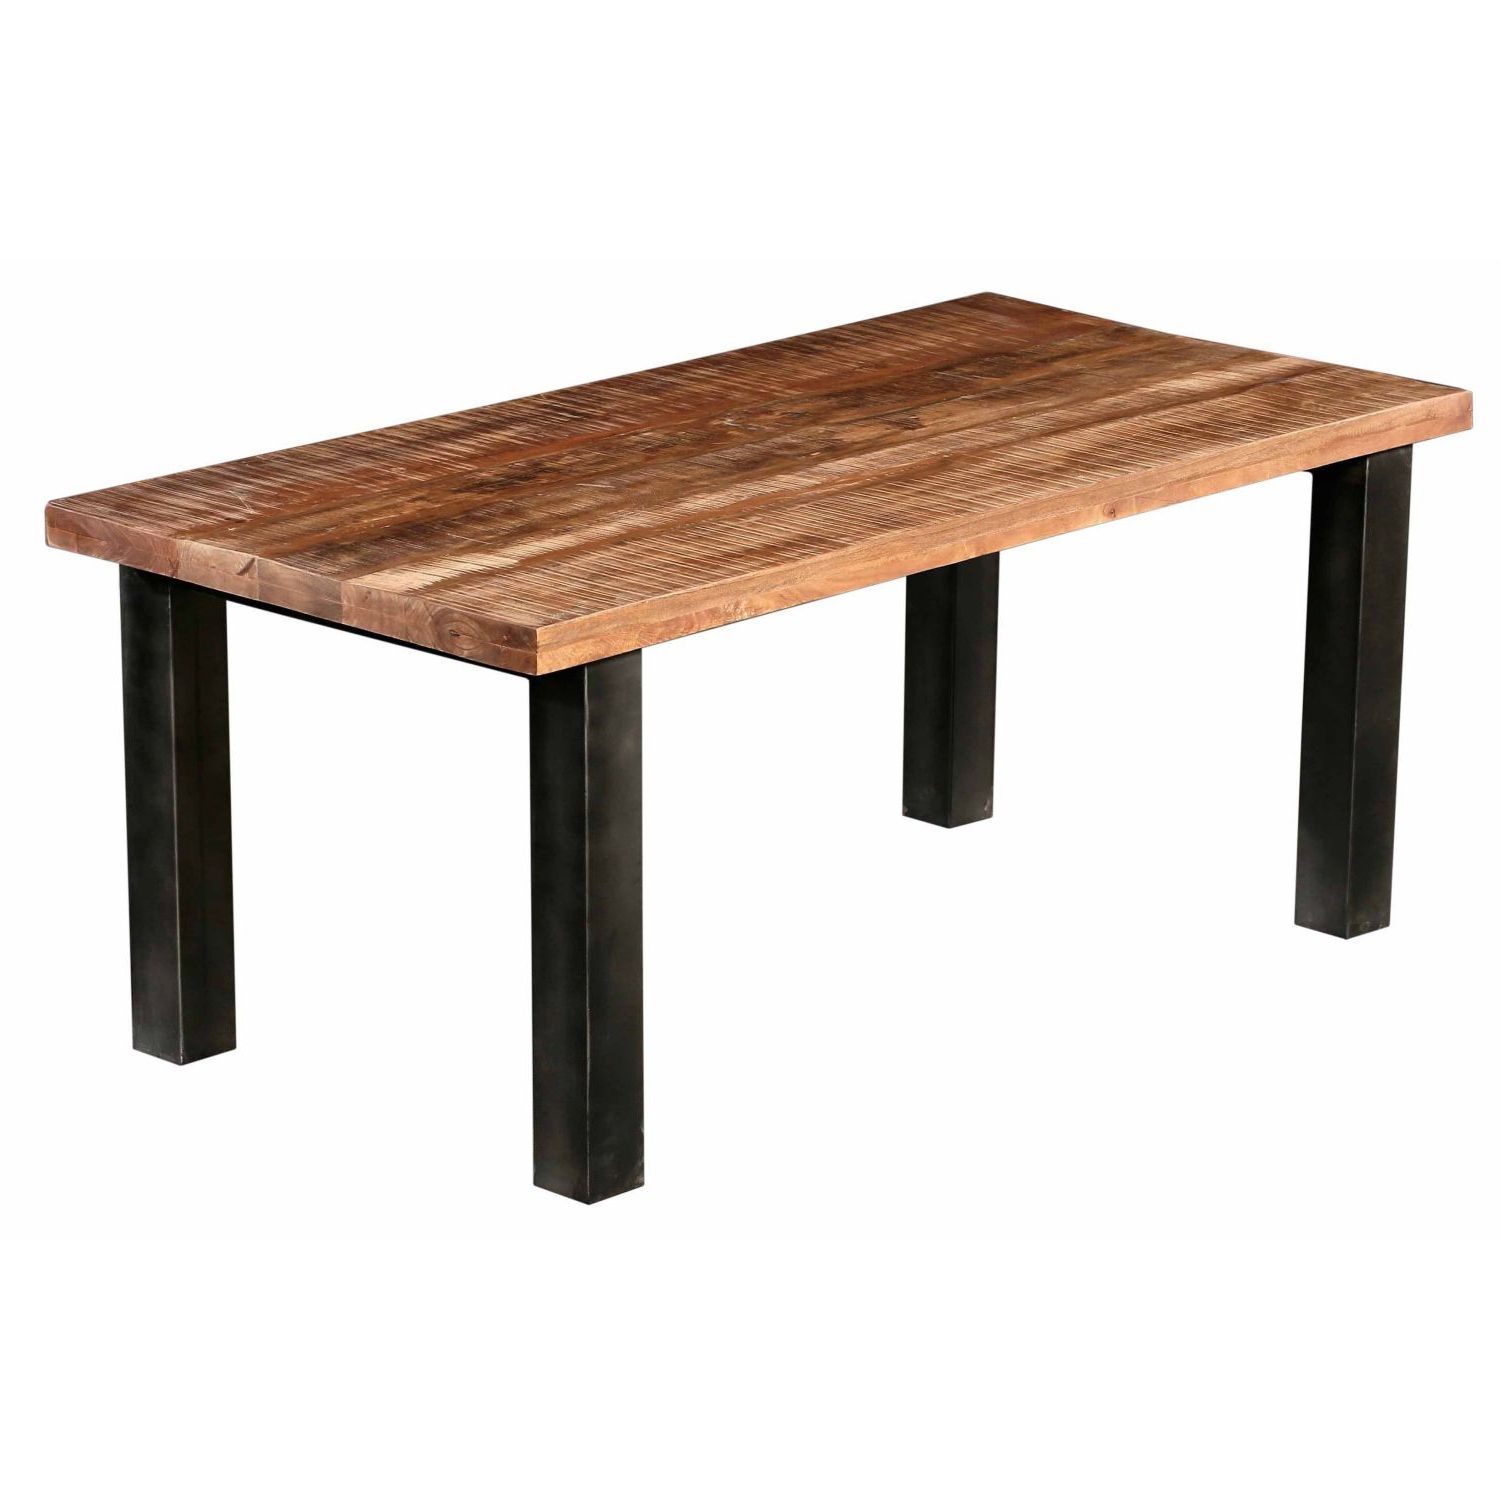 Favorite Wooden & Iron 6 Seater Dining Table Manufacturer In Jodhpur Pertaining To Iron Wood Dining Tables (View 26 of 30)